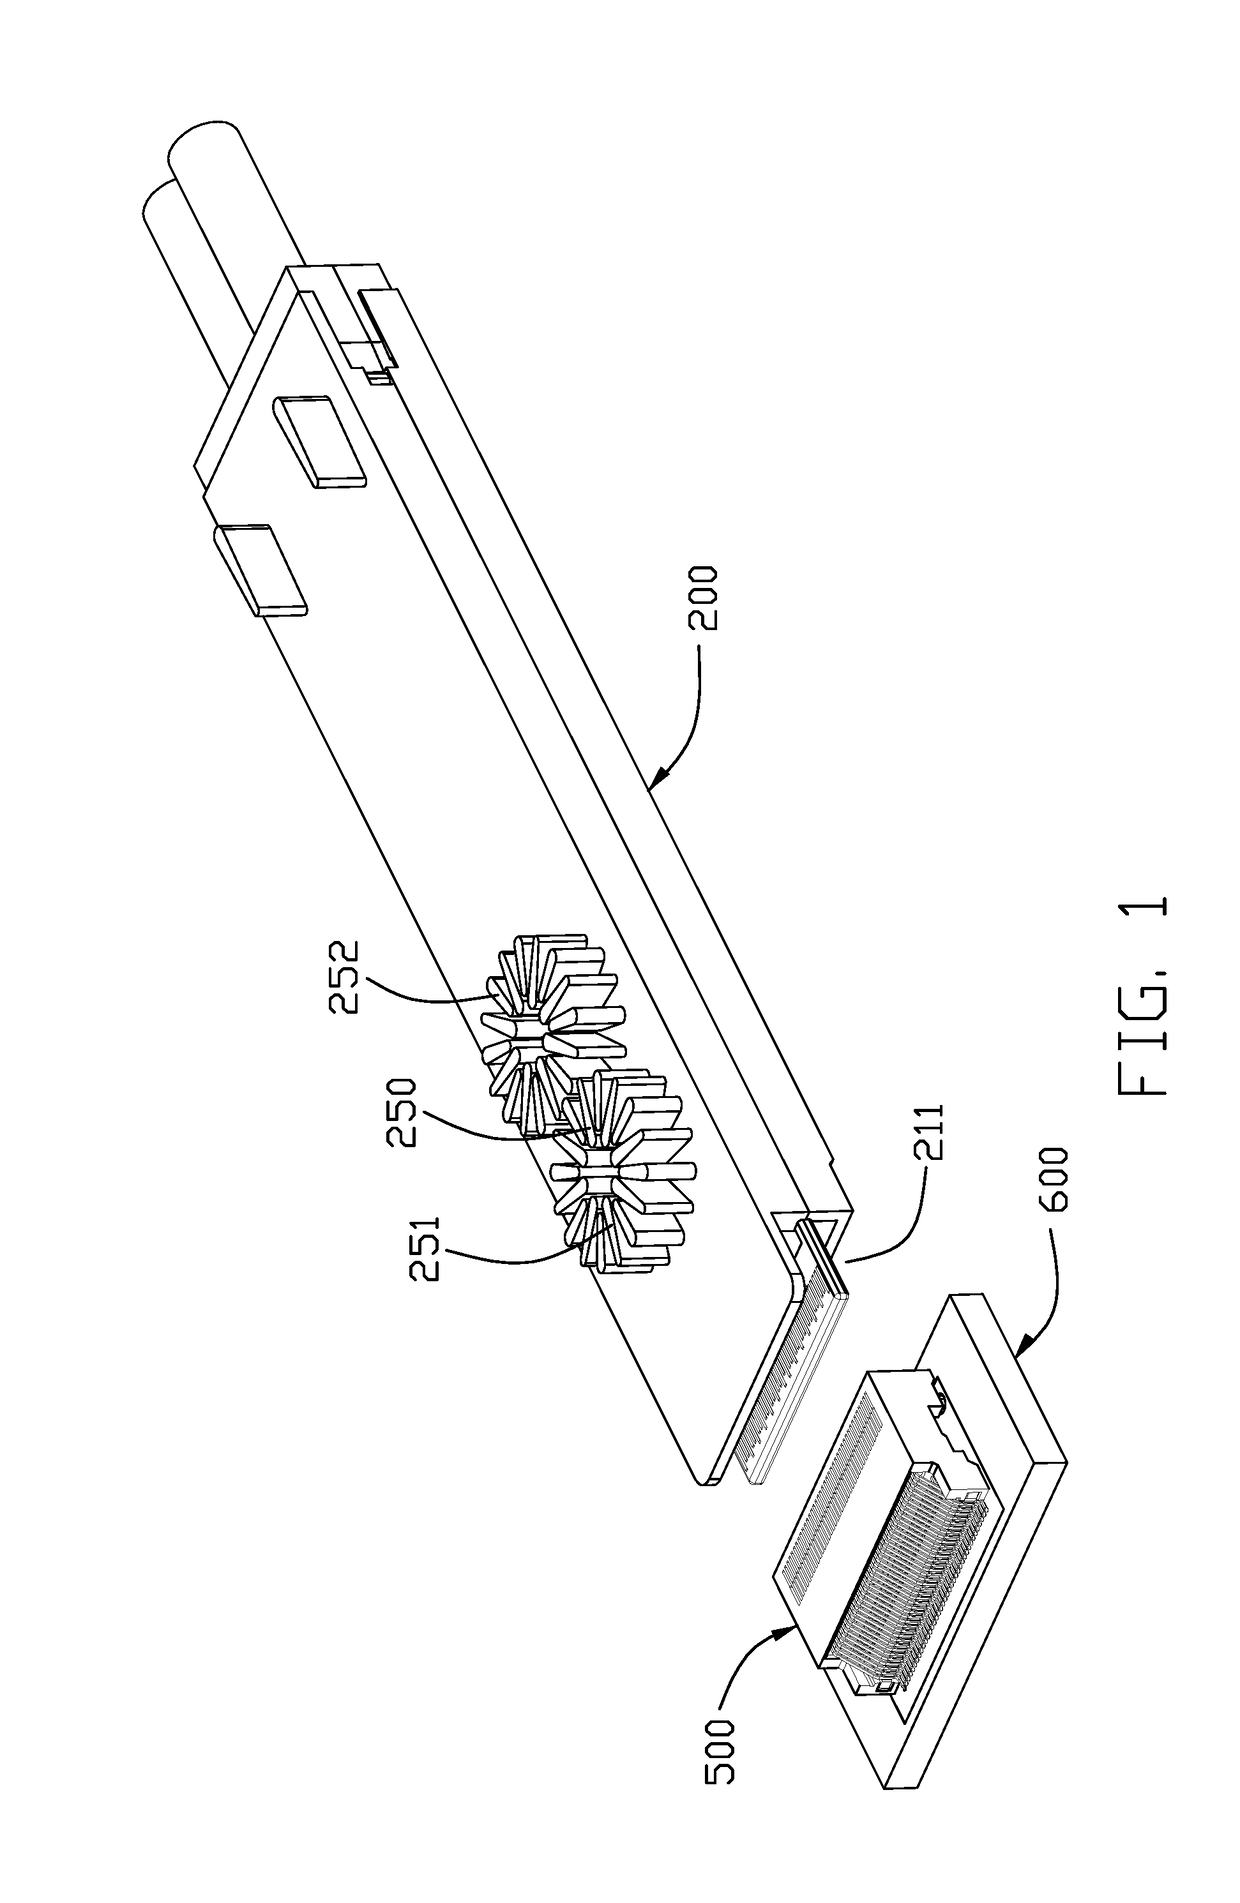 Plug connecetor with a metallic enclosure having heat sink member thereon